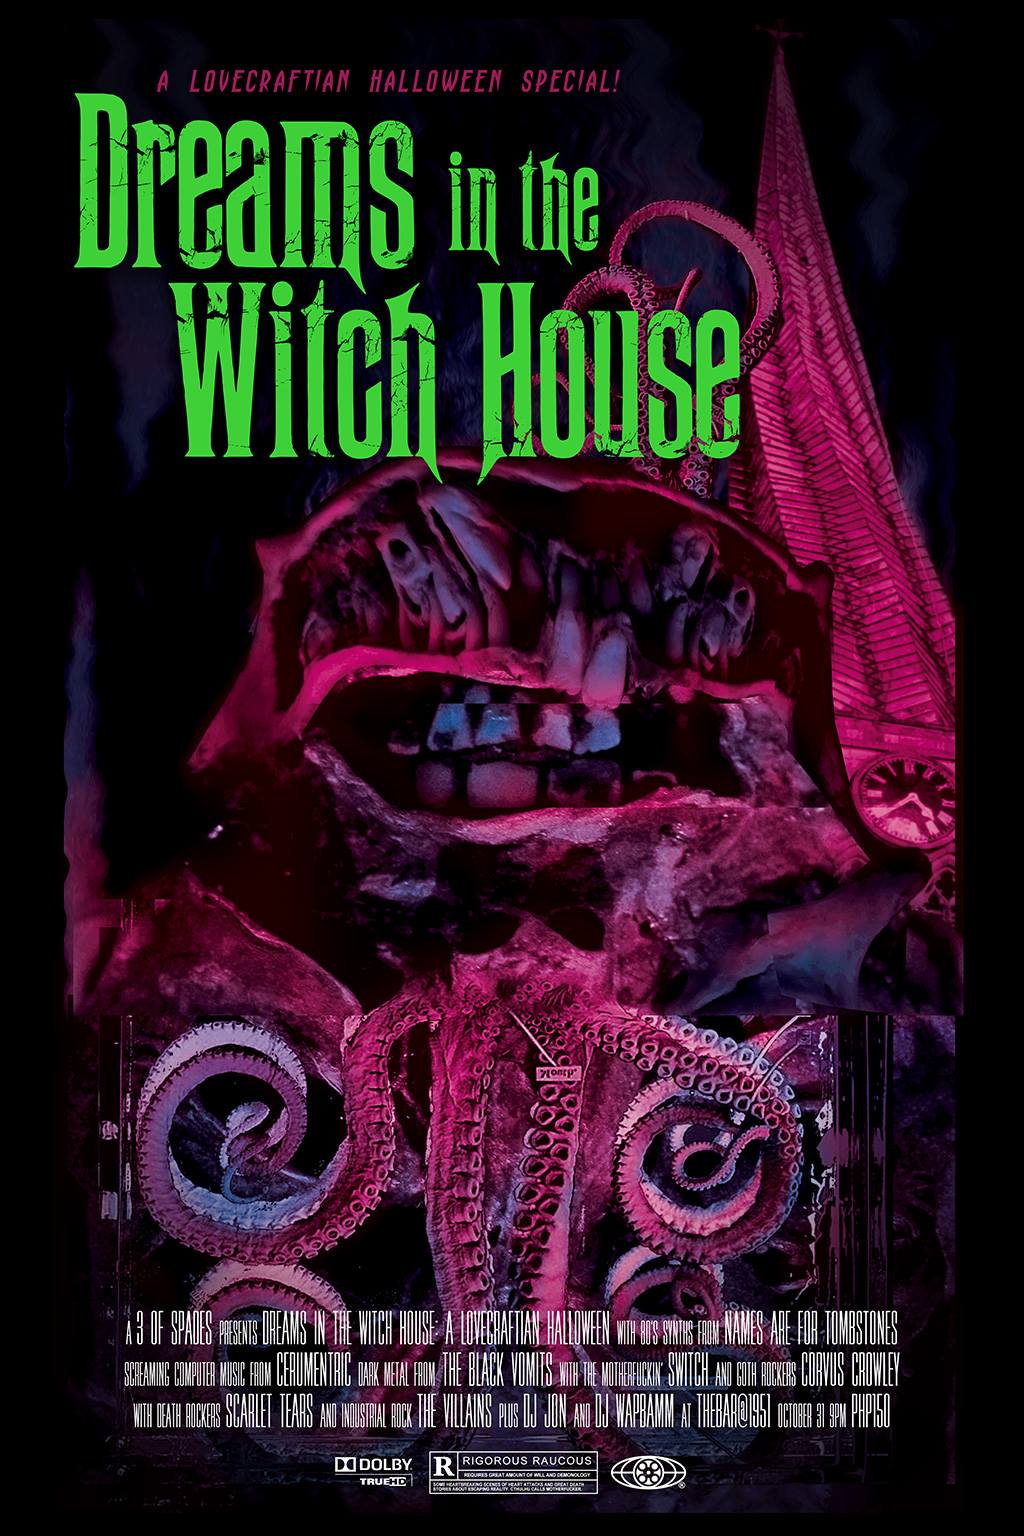 Dreams in the Witch House: A Lovecraftian Halloween Party Saturday, October 31 at 8:00pm - 4:00am Oct 31 at 8:00pm to Nov 1 at 4:00am Show Map Thebar@1951 1951 M. Adriatico Street Malate, 1300 Manila, Philippines Invited by Erick Antonio Fabian Sr. A (sort-of) tribute to Cthulhu and H.P. lovecraft Thinking of where to spend your Halloween? Come to the Witch House (Bar@1951) at Adriatico on Oct. 31! A relaxed, stress-free environment for a wholesome Halloween celebration! Good Food, Good Dark Music and Good Goth company! What To Do There? 1. Dance to the beats of the Dead! 2. Head Bang to Cimmerian Noises! 3. Talk about Cthulhu and other things that creep in the night (Socialize) through mind control and telepathy 4. Eat, Drink & Laugh! 5. Network! Think about Creative Collaborations for future events! These bands (Friends) will serenade us: 1. names are for tombstones 2. SWITCH 3. Scarlet Tears 4. CERUMENTRIC 5. The Black Vomits 6. The Villains 7. Corvus Crowley PLUS DJ Wapbamm : Mindmovie and DJ Jon (Aurora Borealis) WITH A VERY SPECIAL SECRET SOMETHING!!! +++!!! - NAFT CDs for giveaway! (until supply lasts) A. Only Php 150 with 1 Beer already! B. Halloween gear (dressing up) is encouraged! :D C. We promptly start at 9 pm! Supported by SUBKULTURE (USA) ----- Artwork Credits: Rod Rejante All Hallows Eve October 31 2015 at Thebar@1951 Adriatico St. Malate. Artists performing: 1. names are for tombstones 2. SWITCH 3. Scarlet Tears 4. CERUMENTRIC 5. The Black Vomits 6. Corvus Crowley 7. The Villains Also DJ Wapbamm : Mindmovie and DJ Jon (Aurora Borealis) WITH A VERY SPECIAL SECRET SOMETHING!!! NAFT CDs to be given away! (til supplies last) PhP 150 with 1 Beer! Dress to Distress We promptly start at 9 pm!